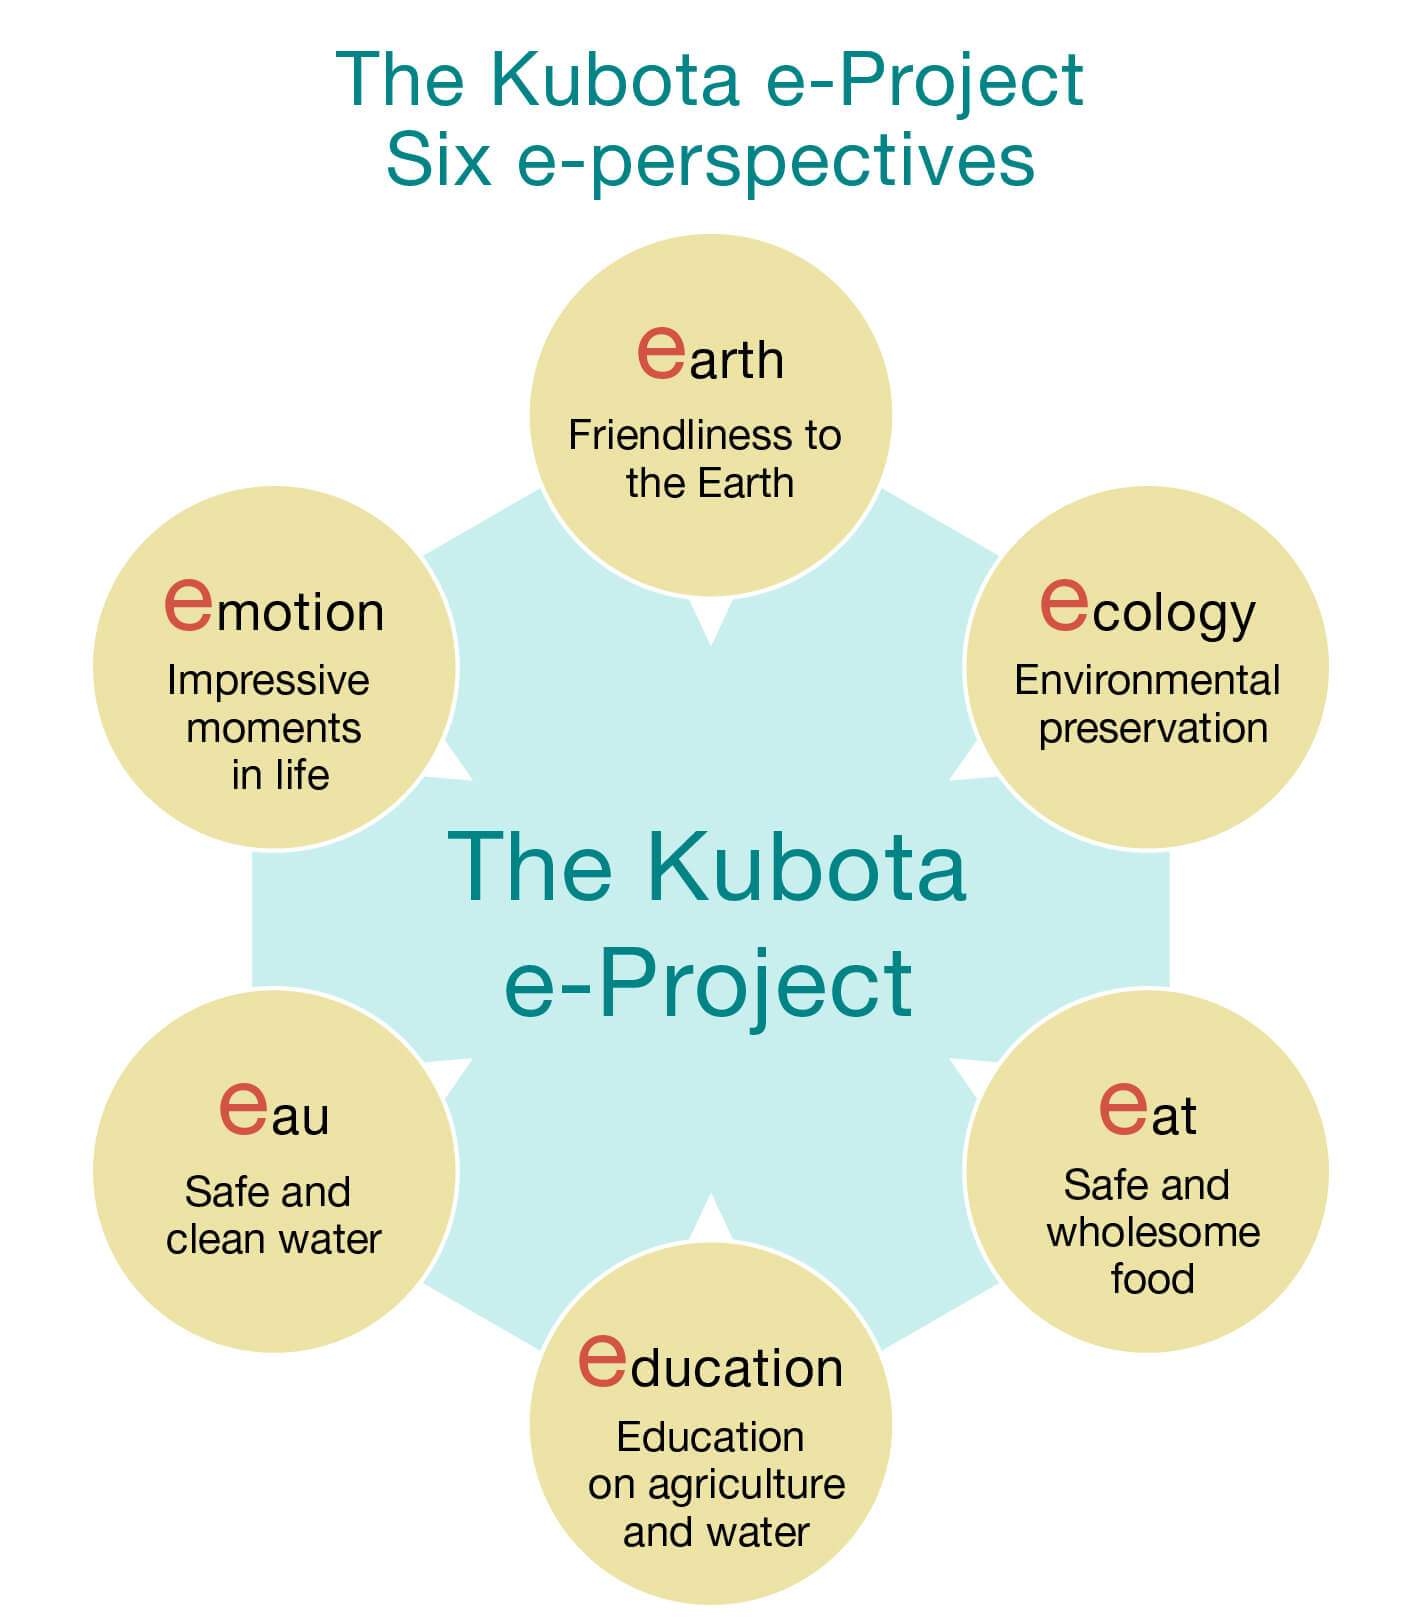 The Kubota e-Project Six e-perspectives:　[earth]Friendliness to the Earth,[ecology]Environmental preservation,[eat]Safe and wholesome food,[education]Education on agriculture and water,[eau]Safe and clean water,[emotion]Impressive moments in life